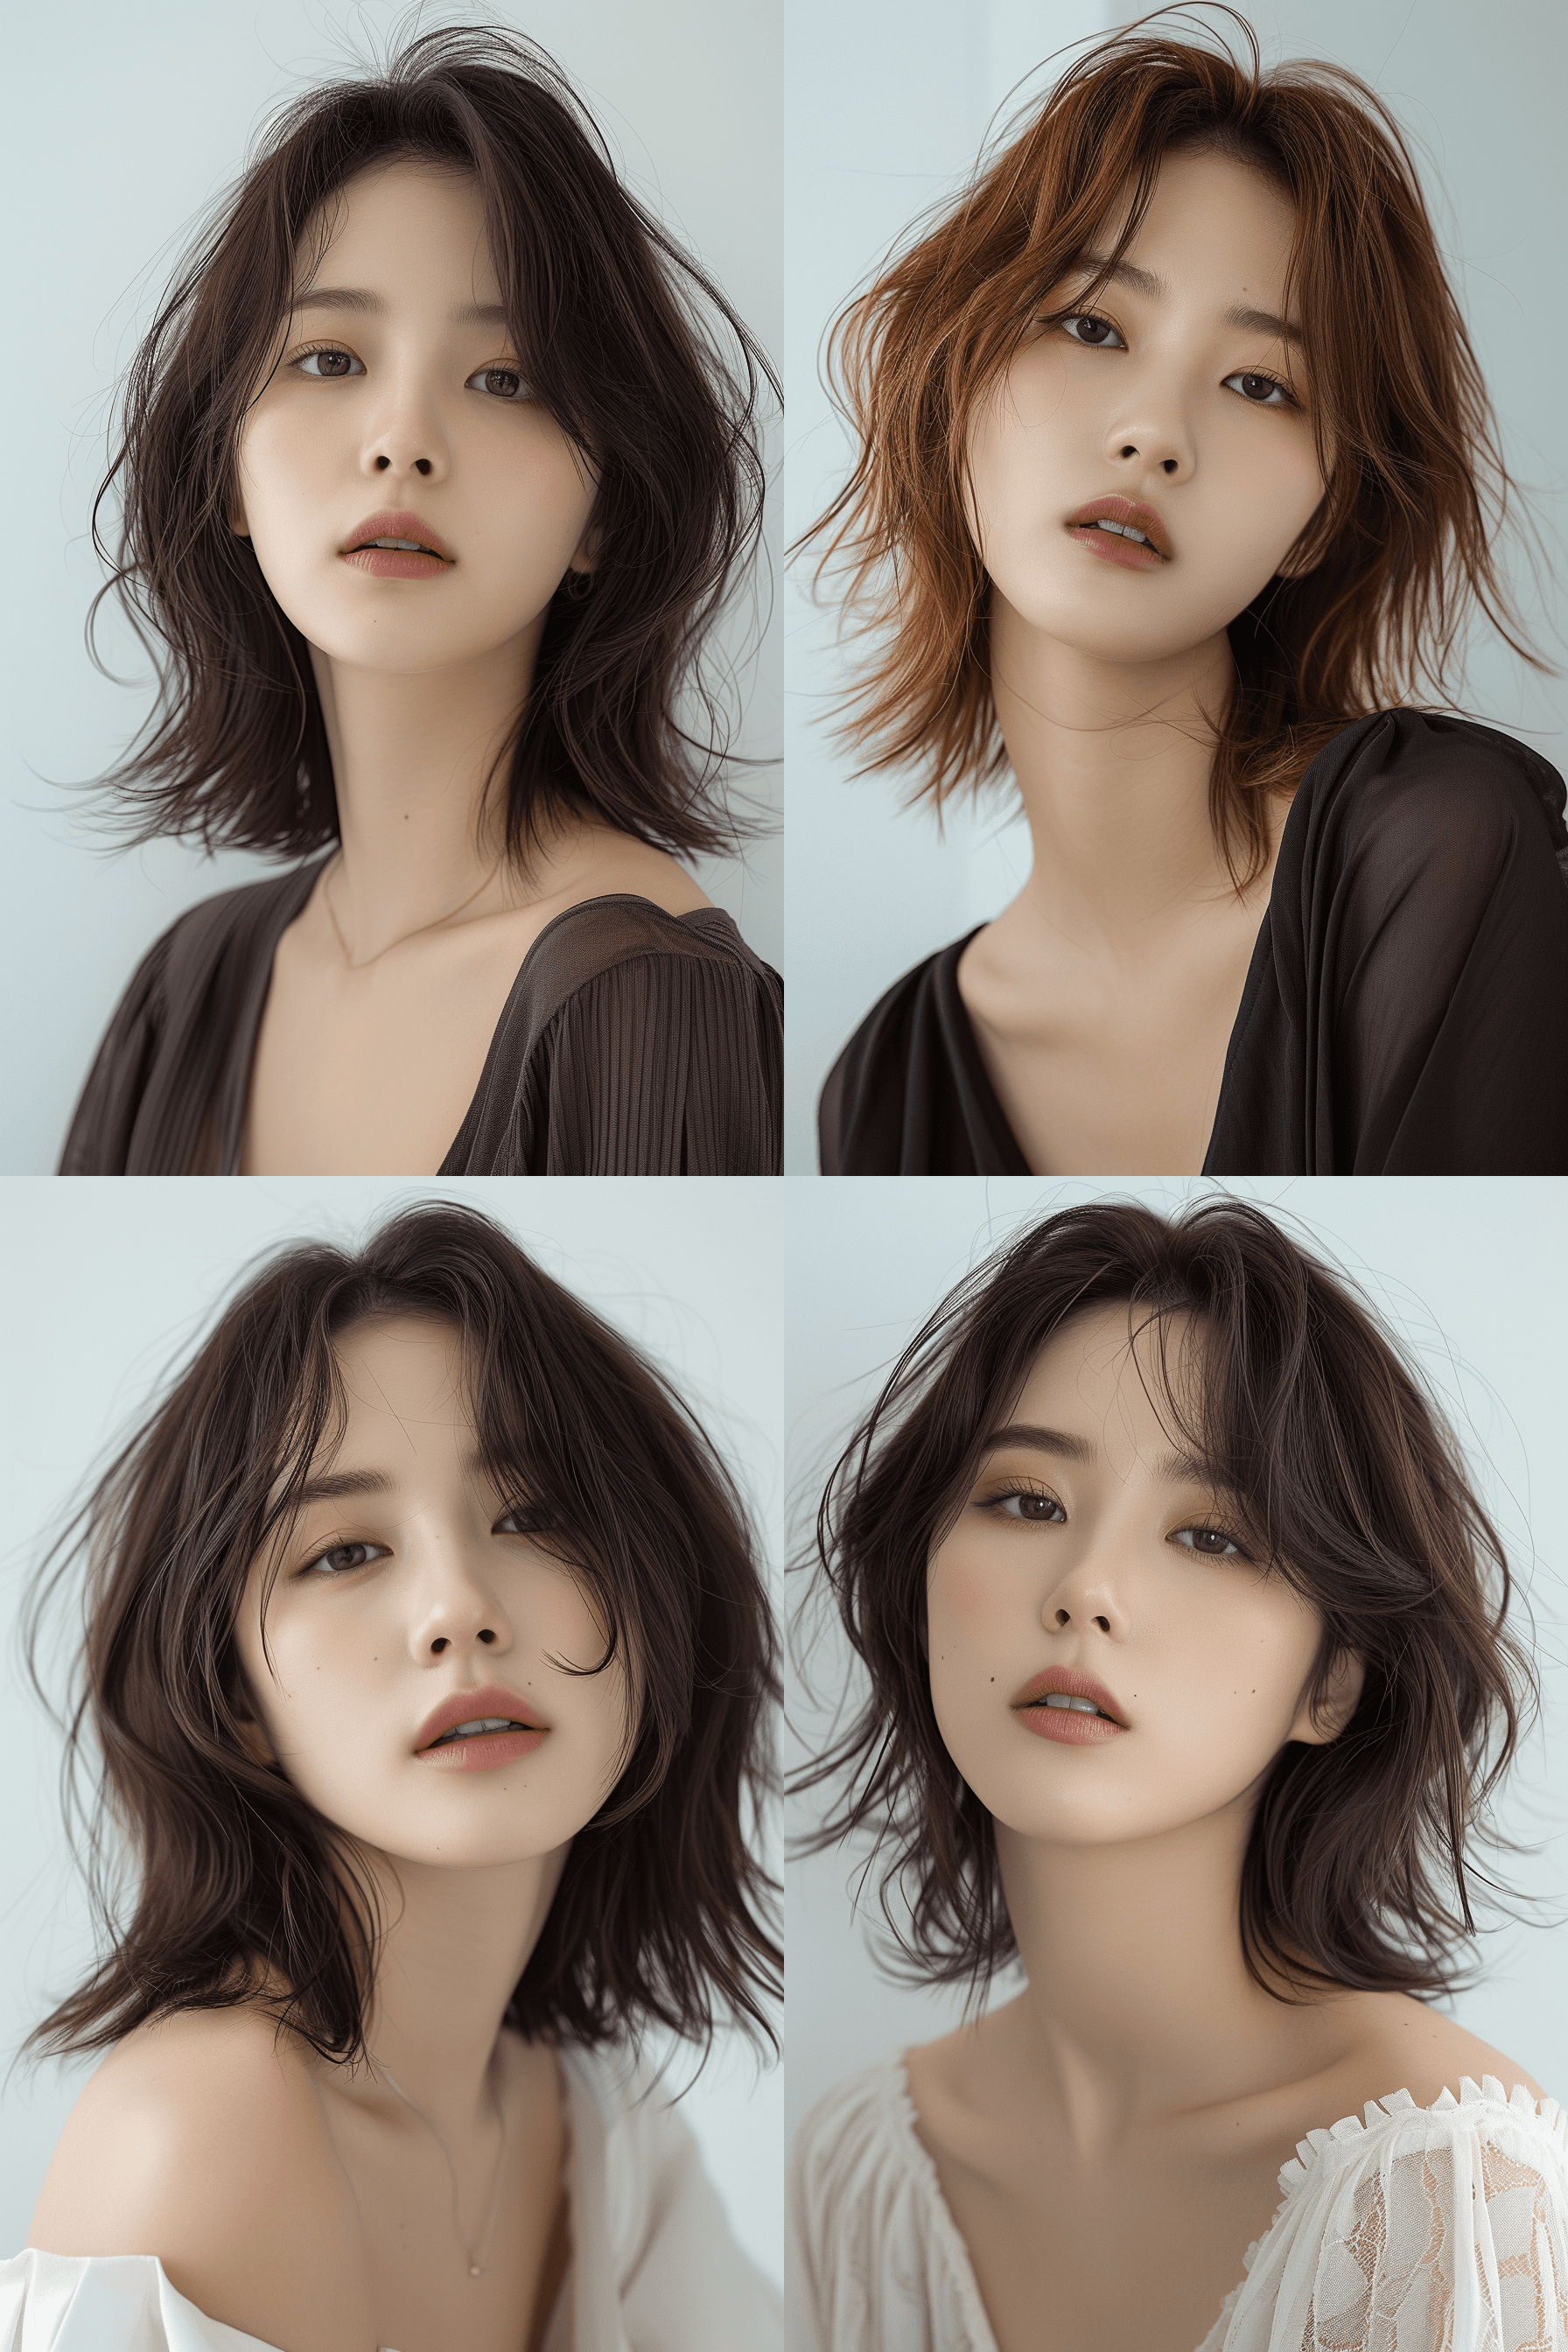 https://s.mj.run/AlJXDEQ9JQY https://s.mj.run/qMZ2kmb7TcI Visual blockbuster on the theme of hairstyle, Korean girl with short hair, fashionable clothing with light hair, Korean girl looking frontally at the camera, without makeup highlighting the texture and pores of facial skin, full color picture, close up - white solid background --ar 2:3 --style raw --stylize 750 --v 6